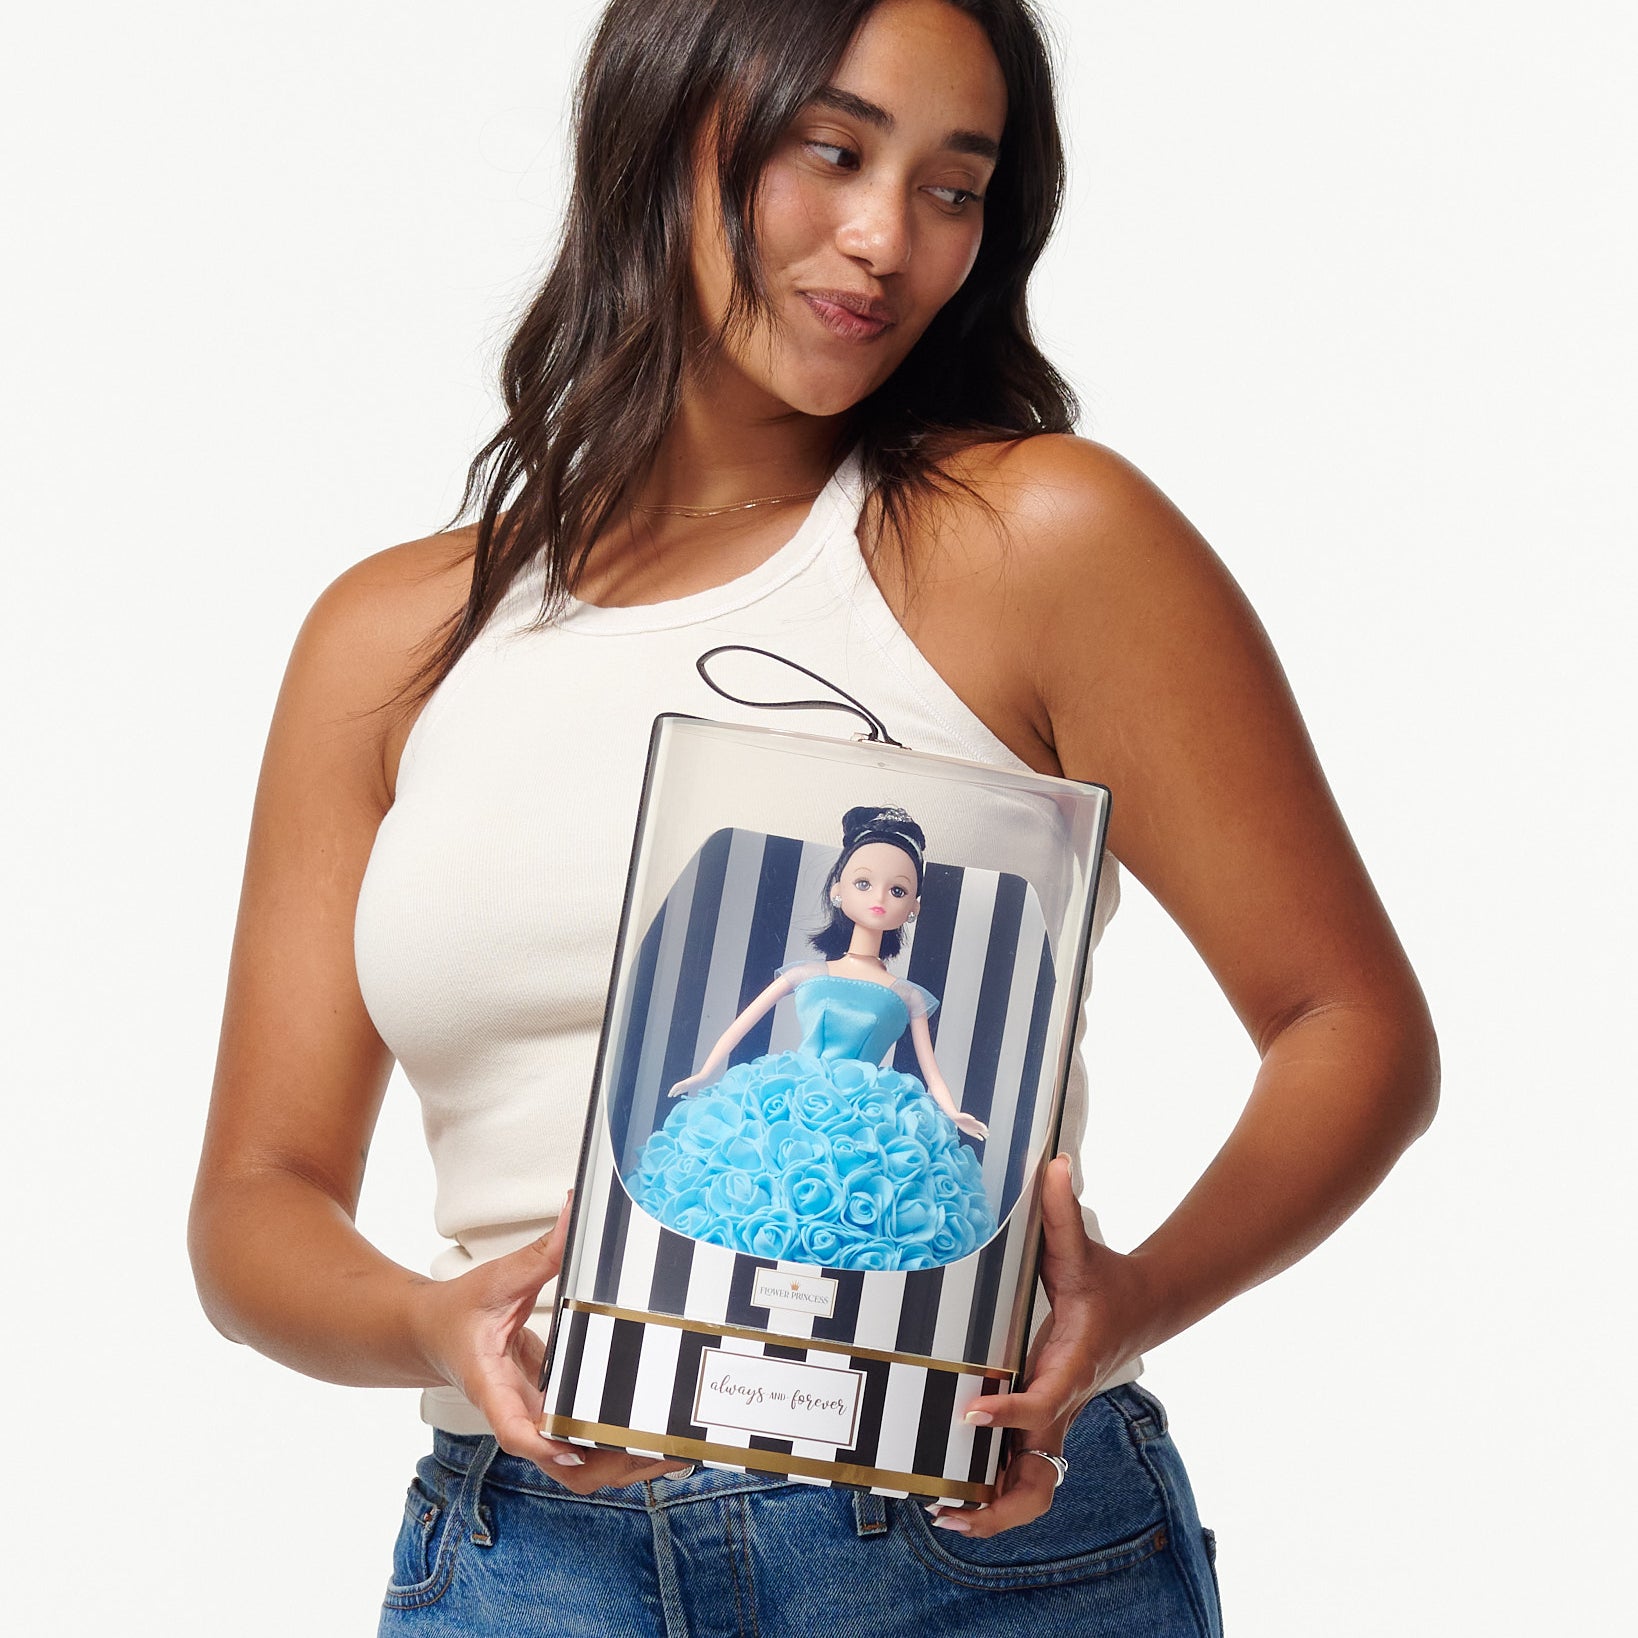 A woman is pictured holding a boxed doll. The doll within the packaging is styled with black hair, green eyes, and is dressed in a blue rose-adorned gown. The box displays black and white stripes, a gold trim, and a black ribbon with the text "forever always" on the top. The woman is casually dressed in a white tank top and blue jeans.